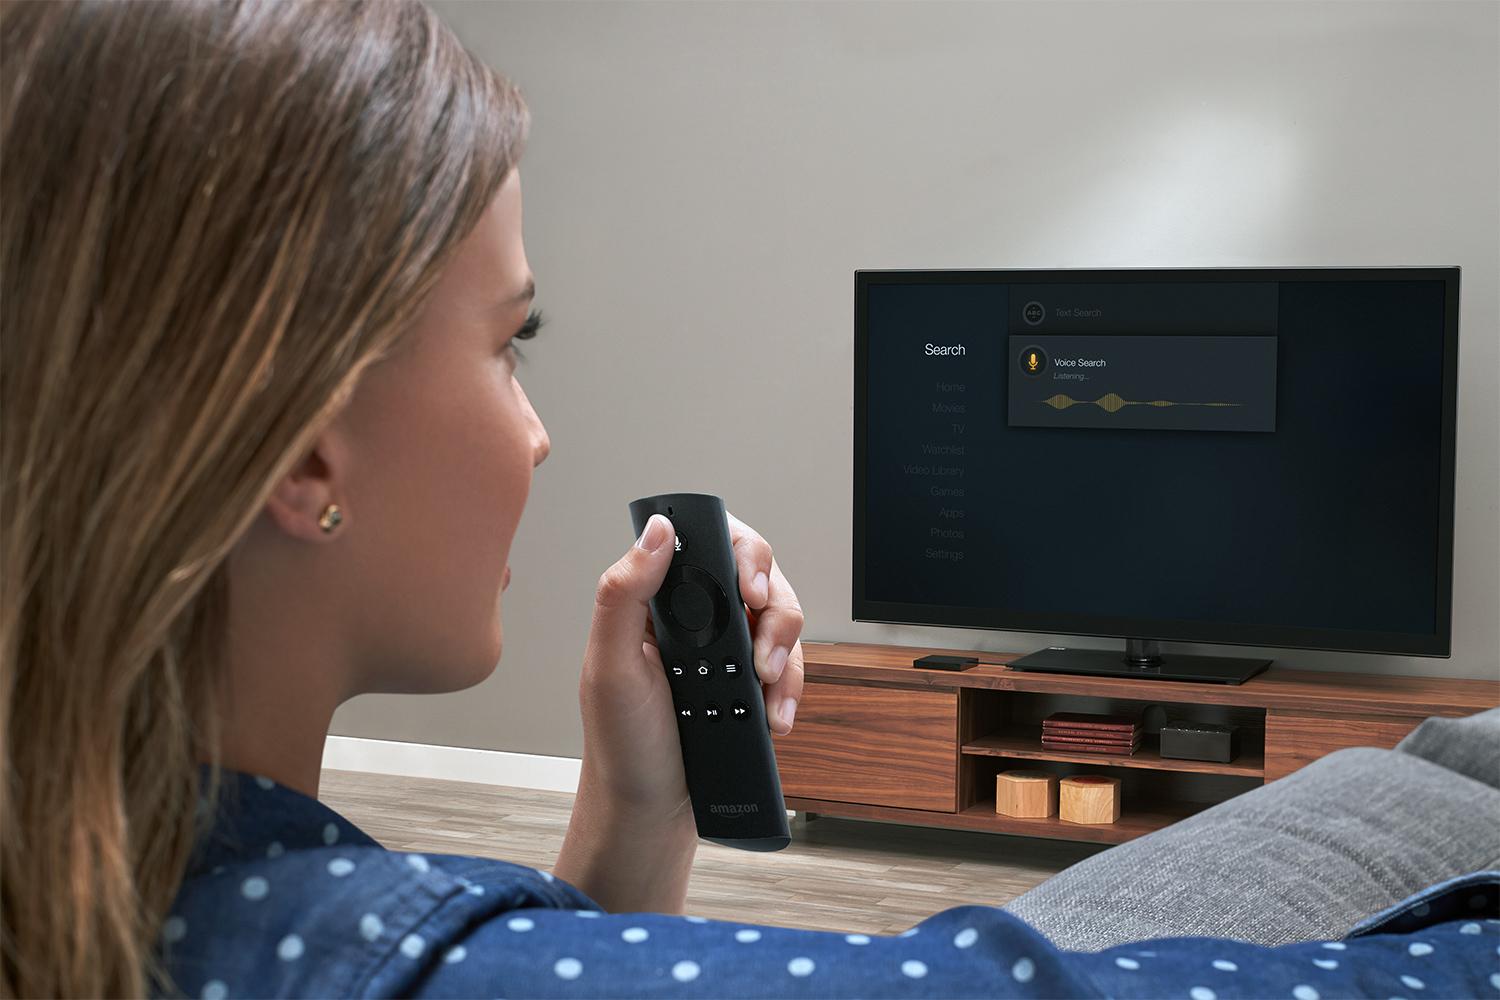 Fire TV Users Can Now Browse the Web With Firefox and Silk